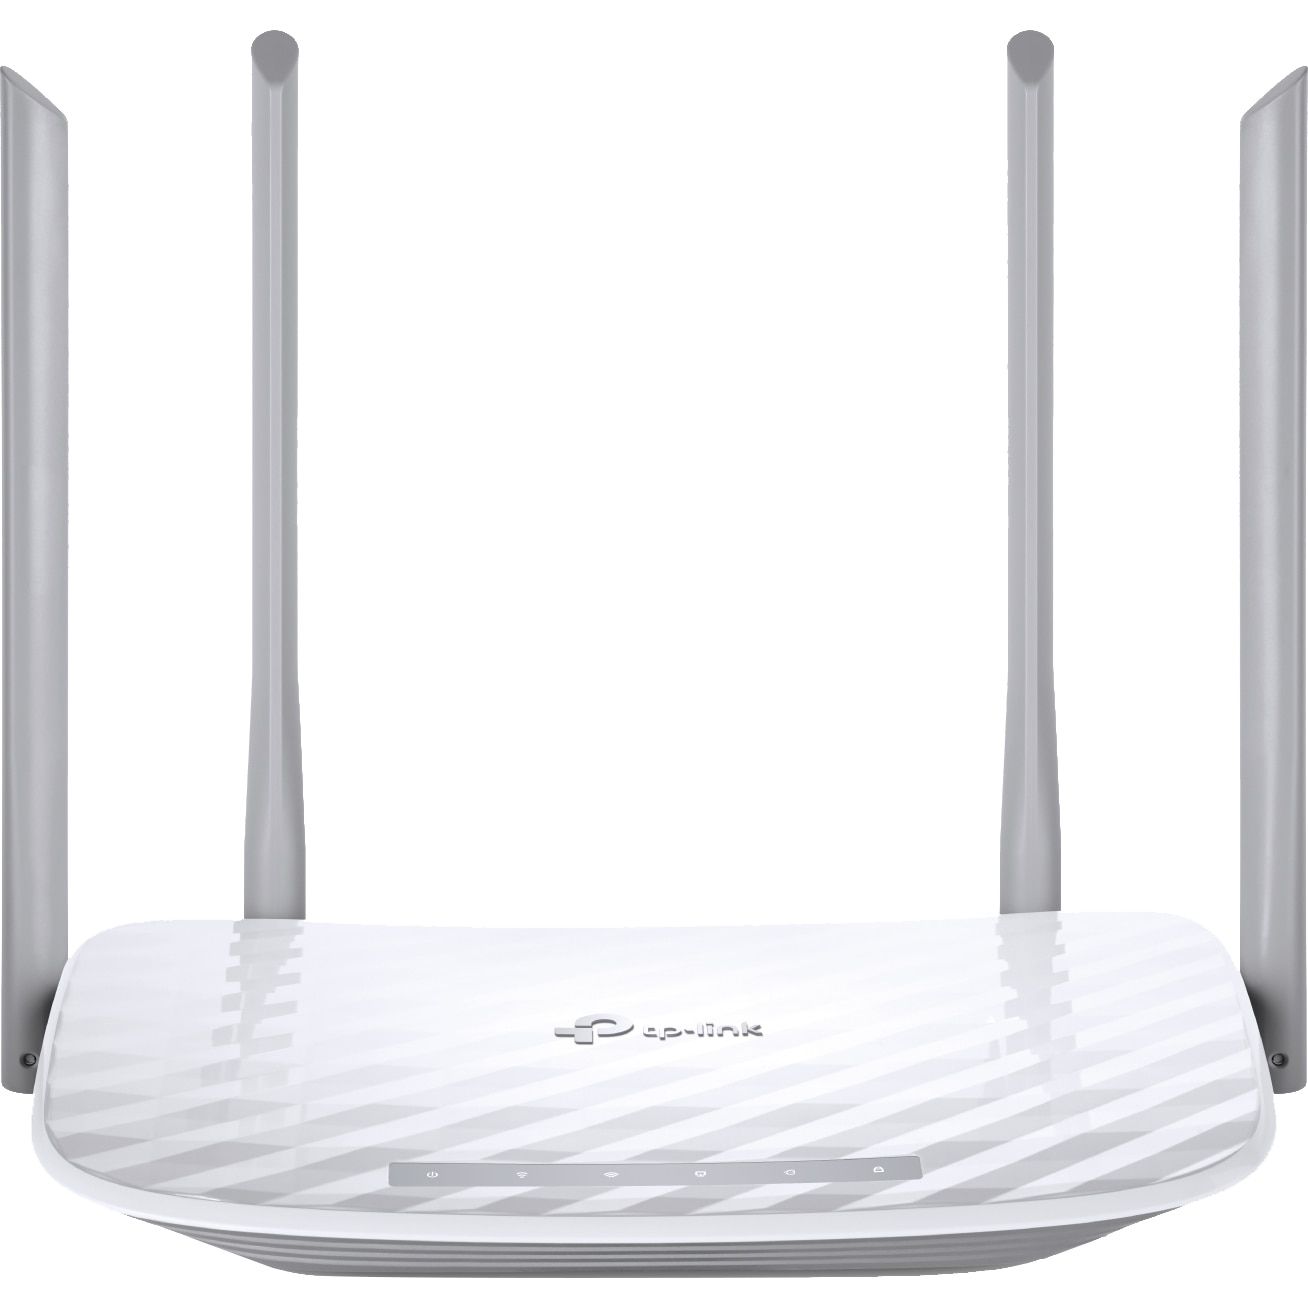 Router Wireless TP-Link ARCHER C50 v3, 1xWAN 10/100, 4xLAN 10/100, 4antene externe,dual-band AC1200 (300/867Mbps), Buton Wireless ON/OFF_6